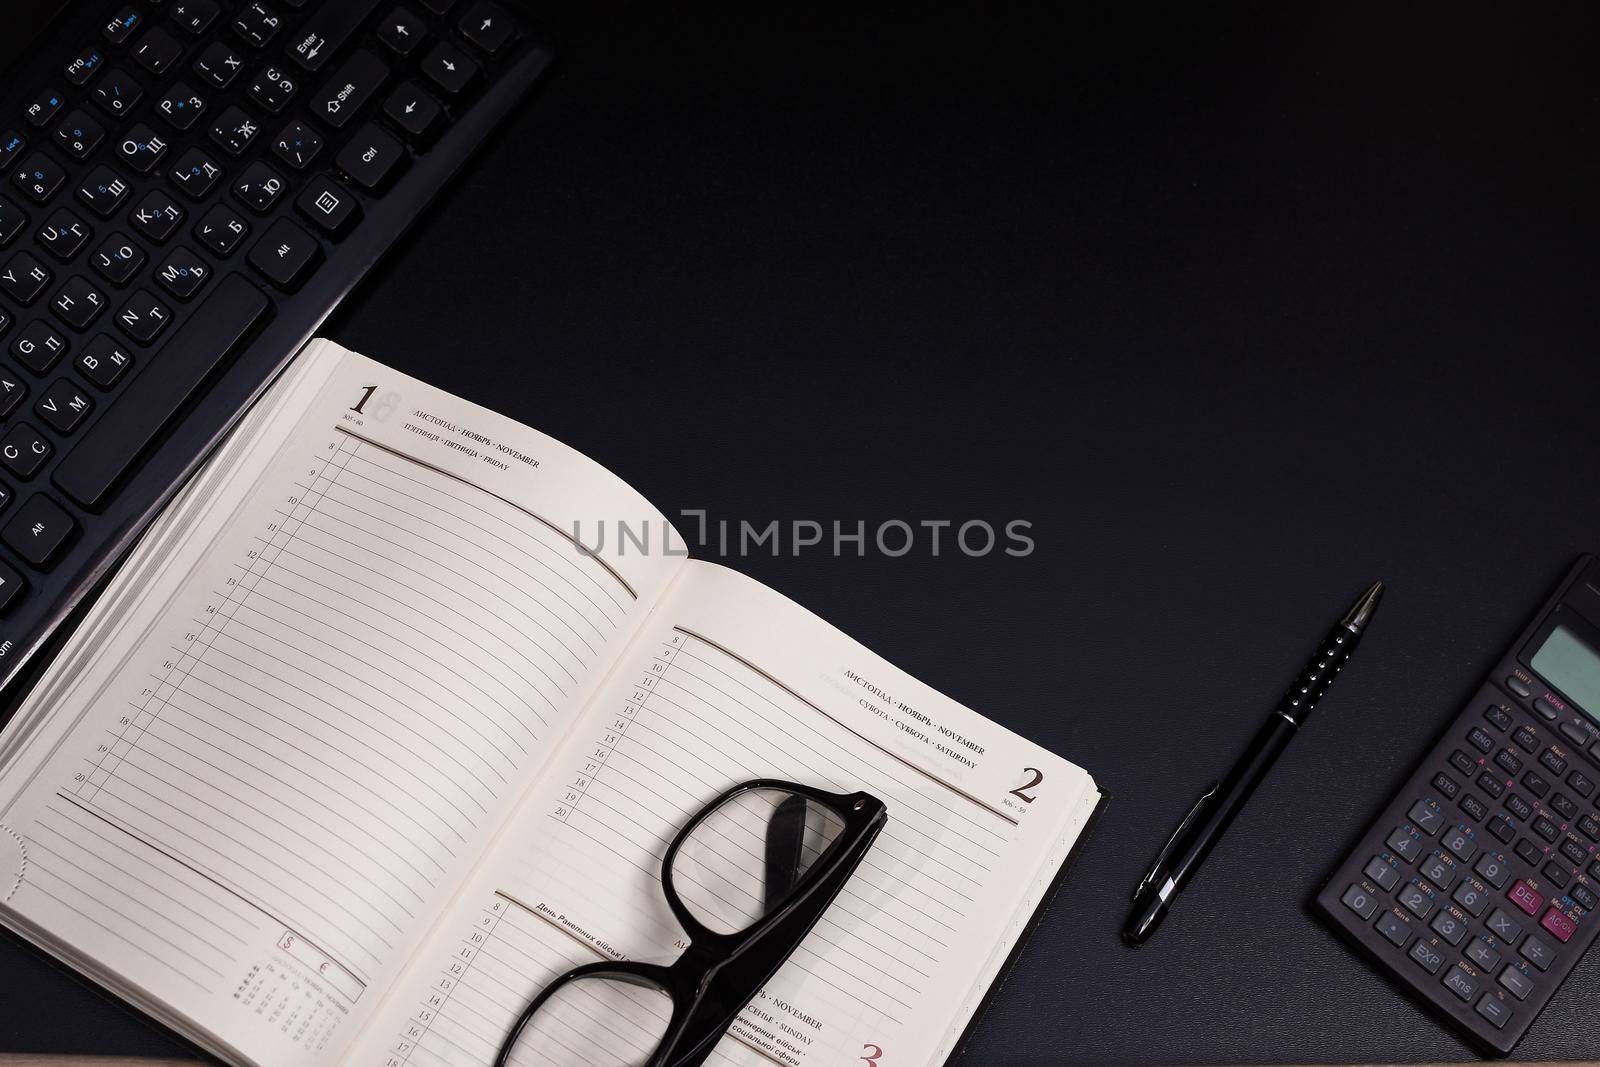 Black desk office with keyboard, calculator and other work supplies. Top view with copy space for input the text. Designer workspace on desk table essential elements on flat lay. Place for an inscription.  by ja-aljona